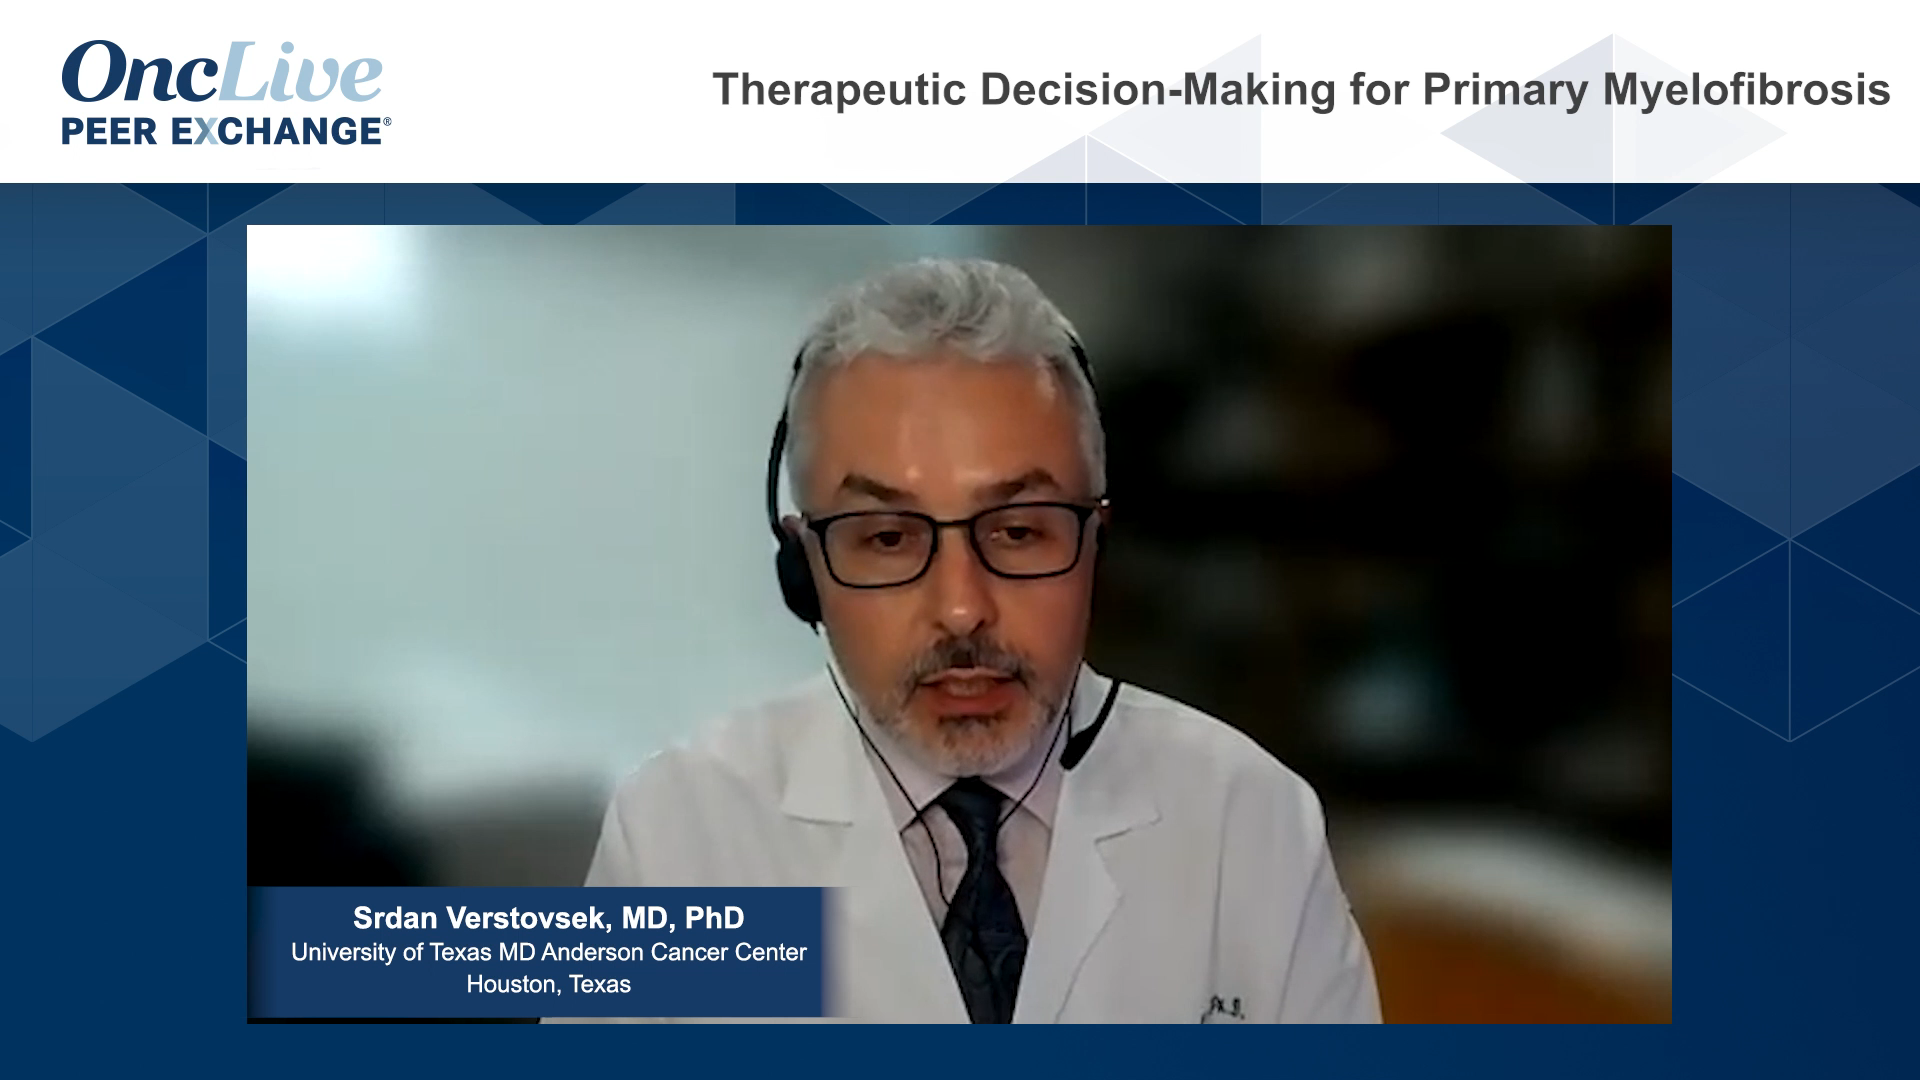 Therapeutic Decision-Making for Primary Myelofibrosis